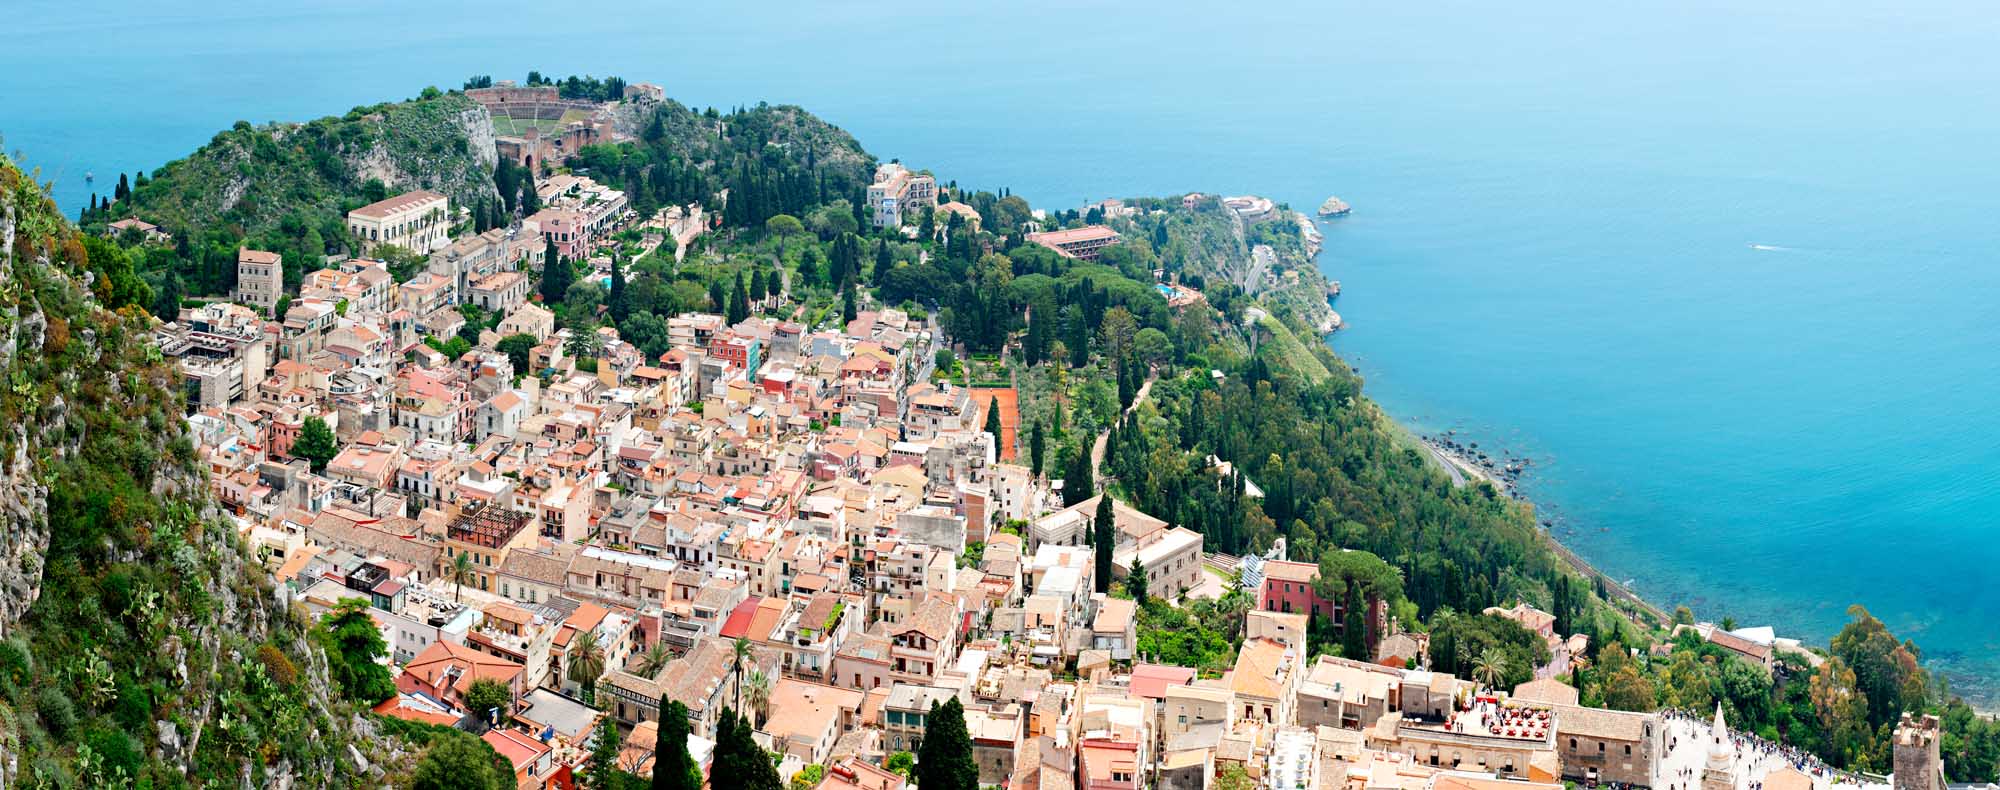 Taormina, on the east coast of the island of Sicily, Italy, has been a popular tourist destination for 200 years.